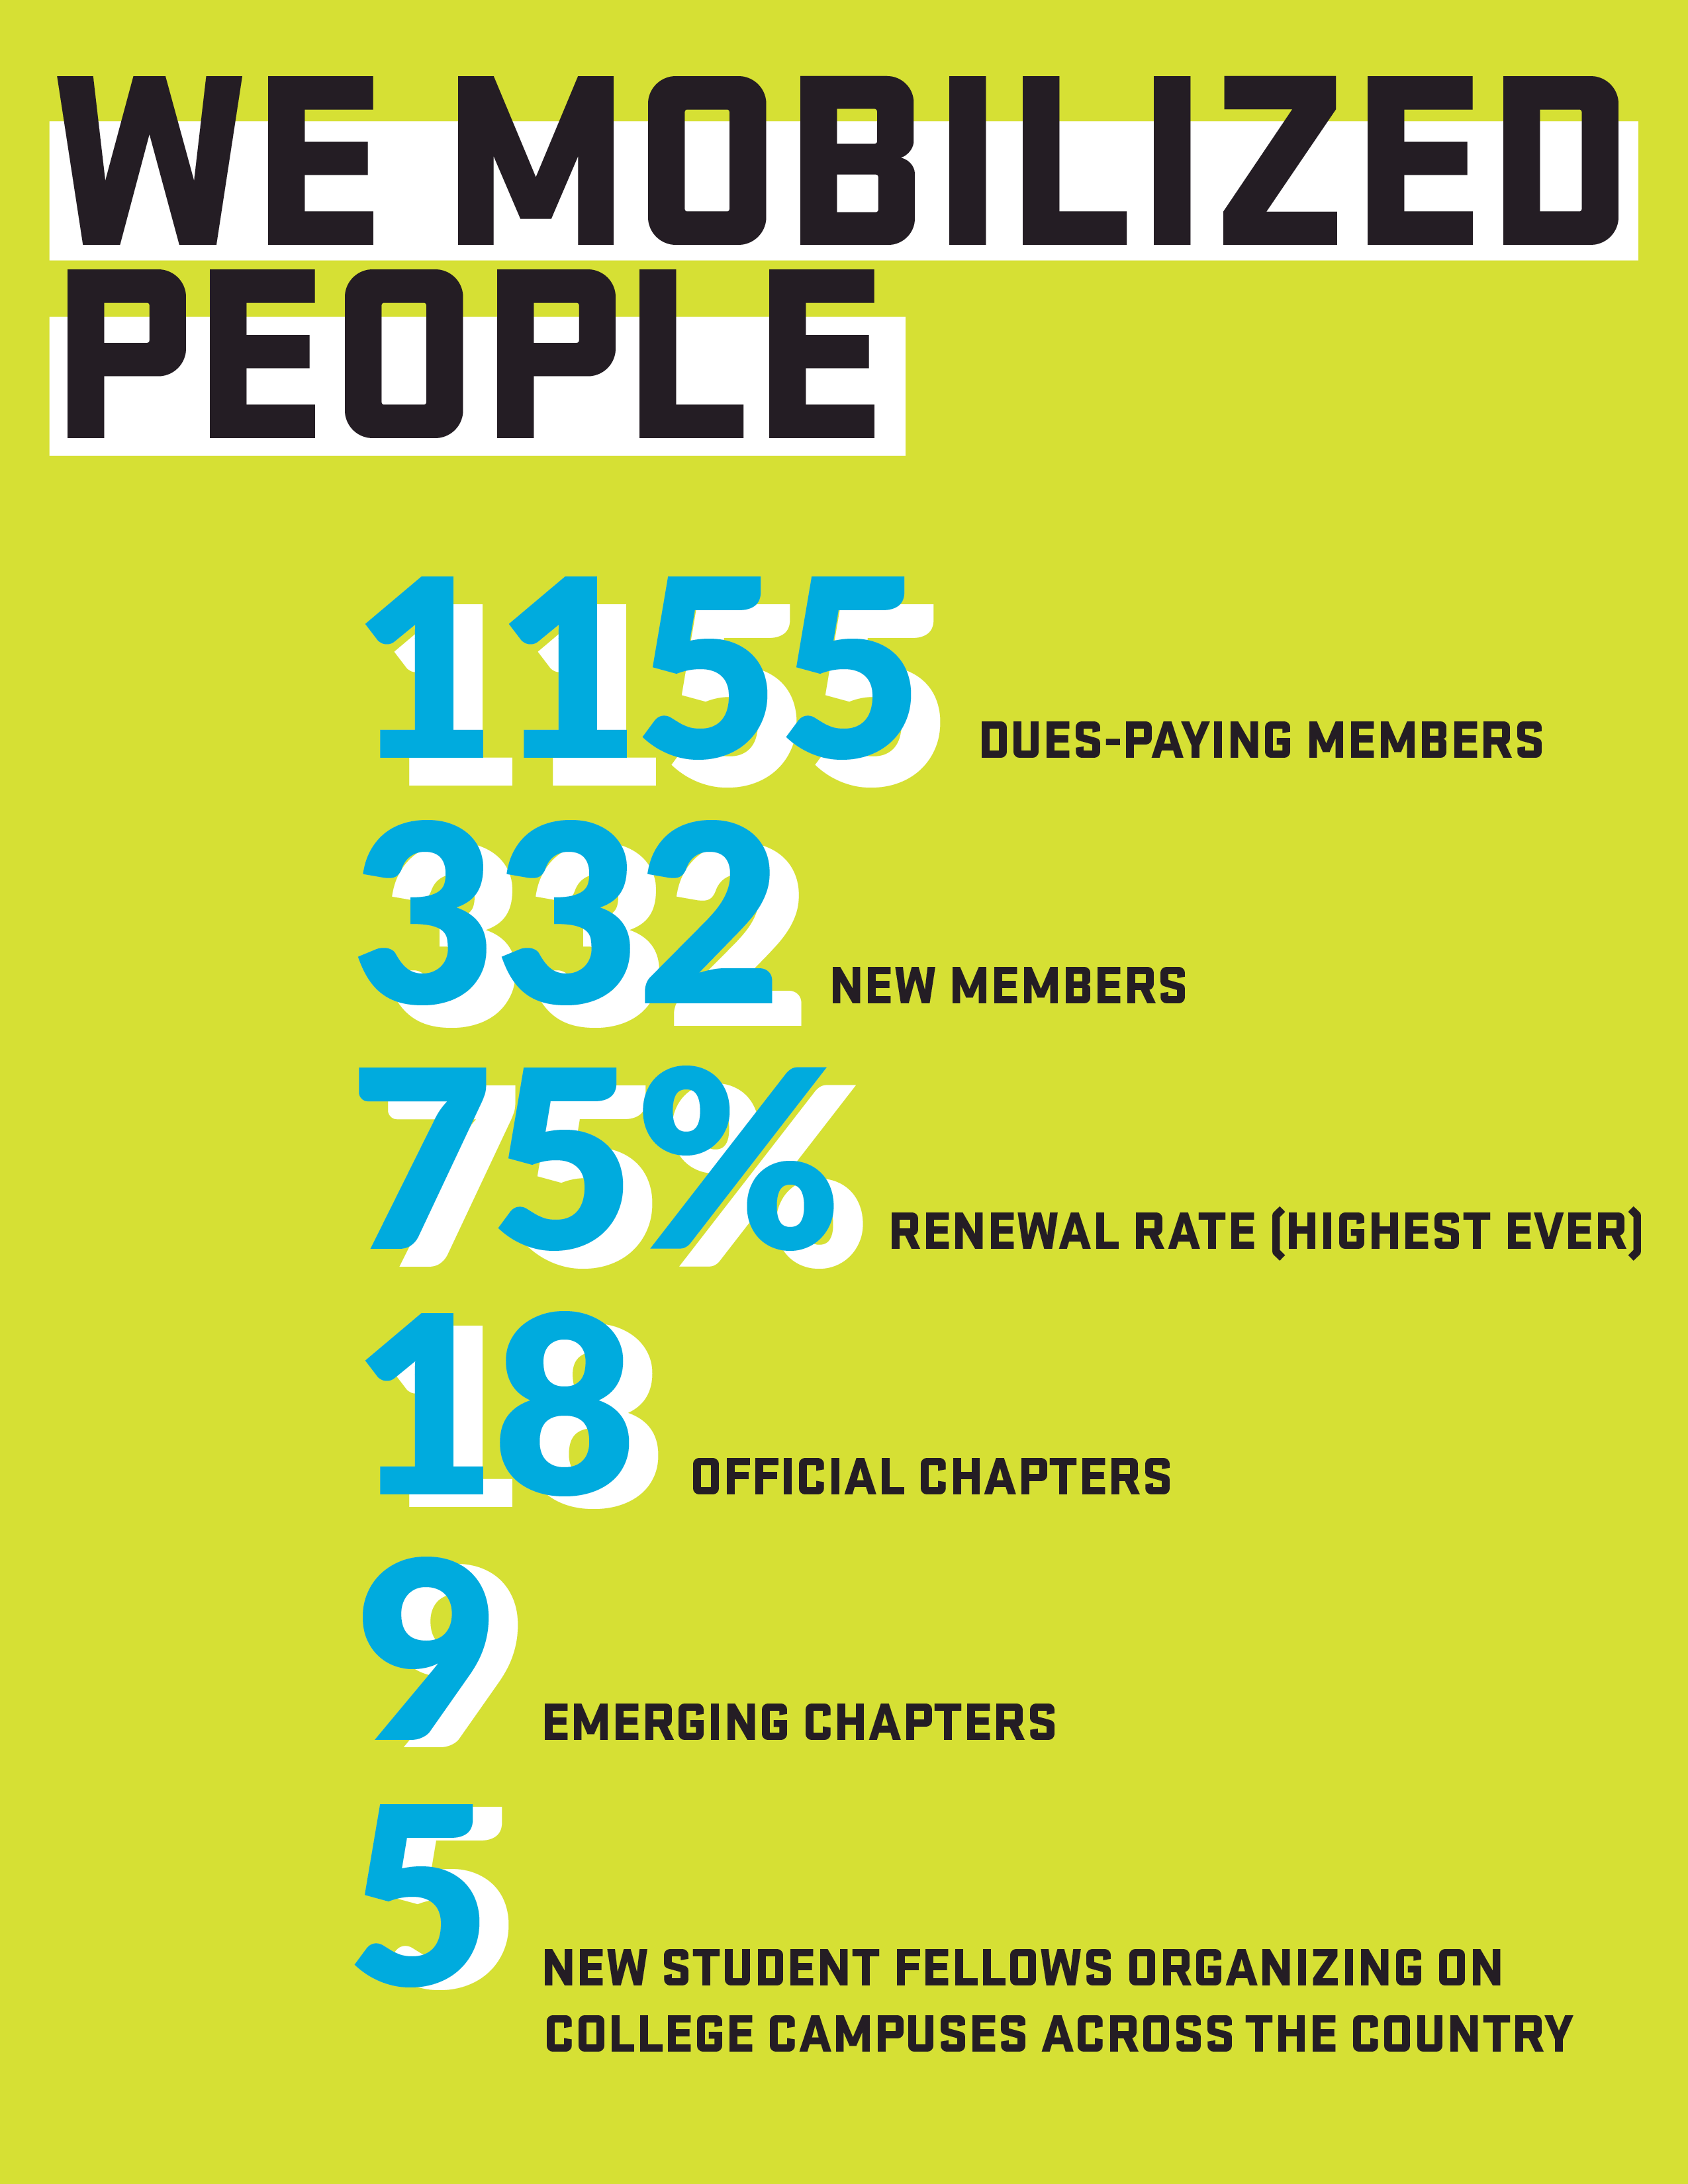 We ended the year with 1155 dues-paying members – this included 332 new members and a 75% renewal rate (our highest ever!) 18 official chapters and 9 emerging chapters. 5 new student fellows organizing college campuses across the country